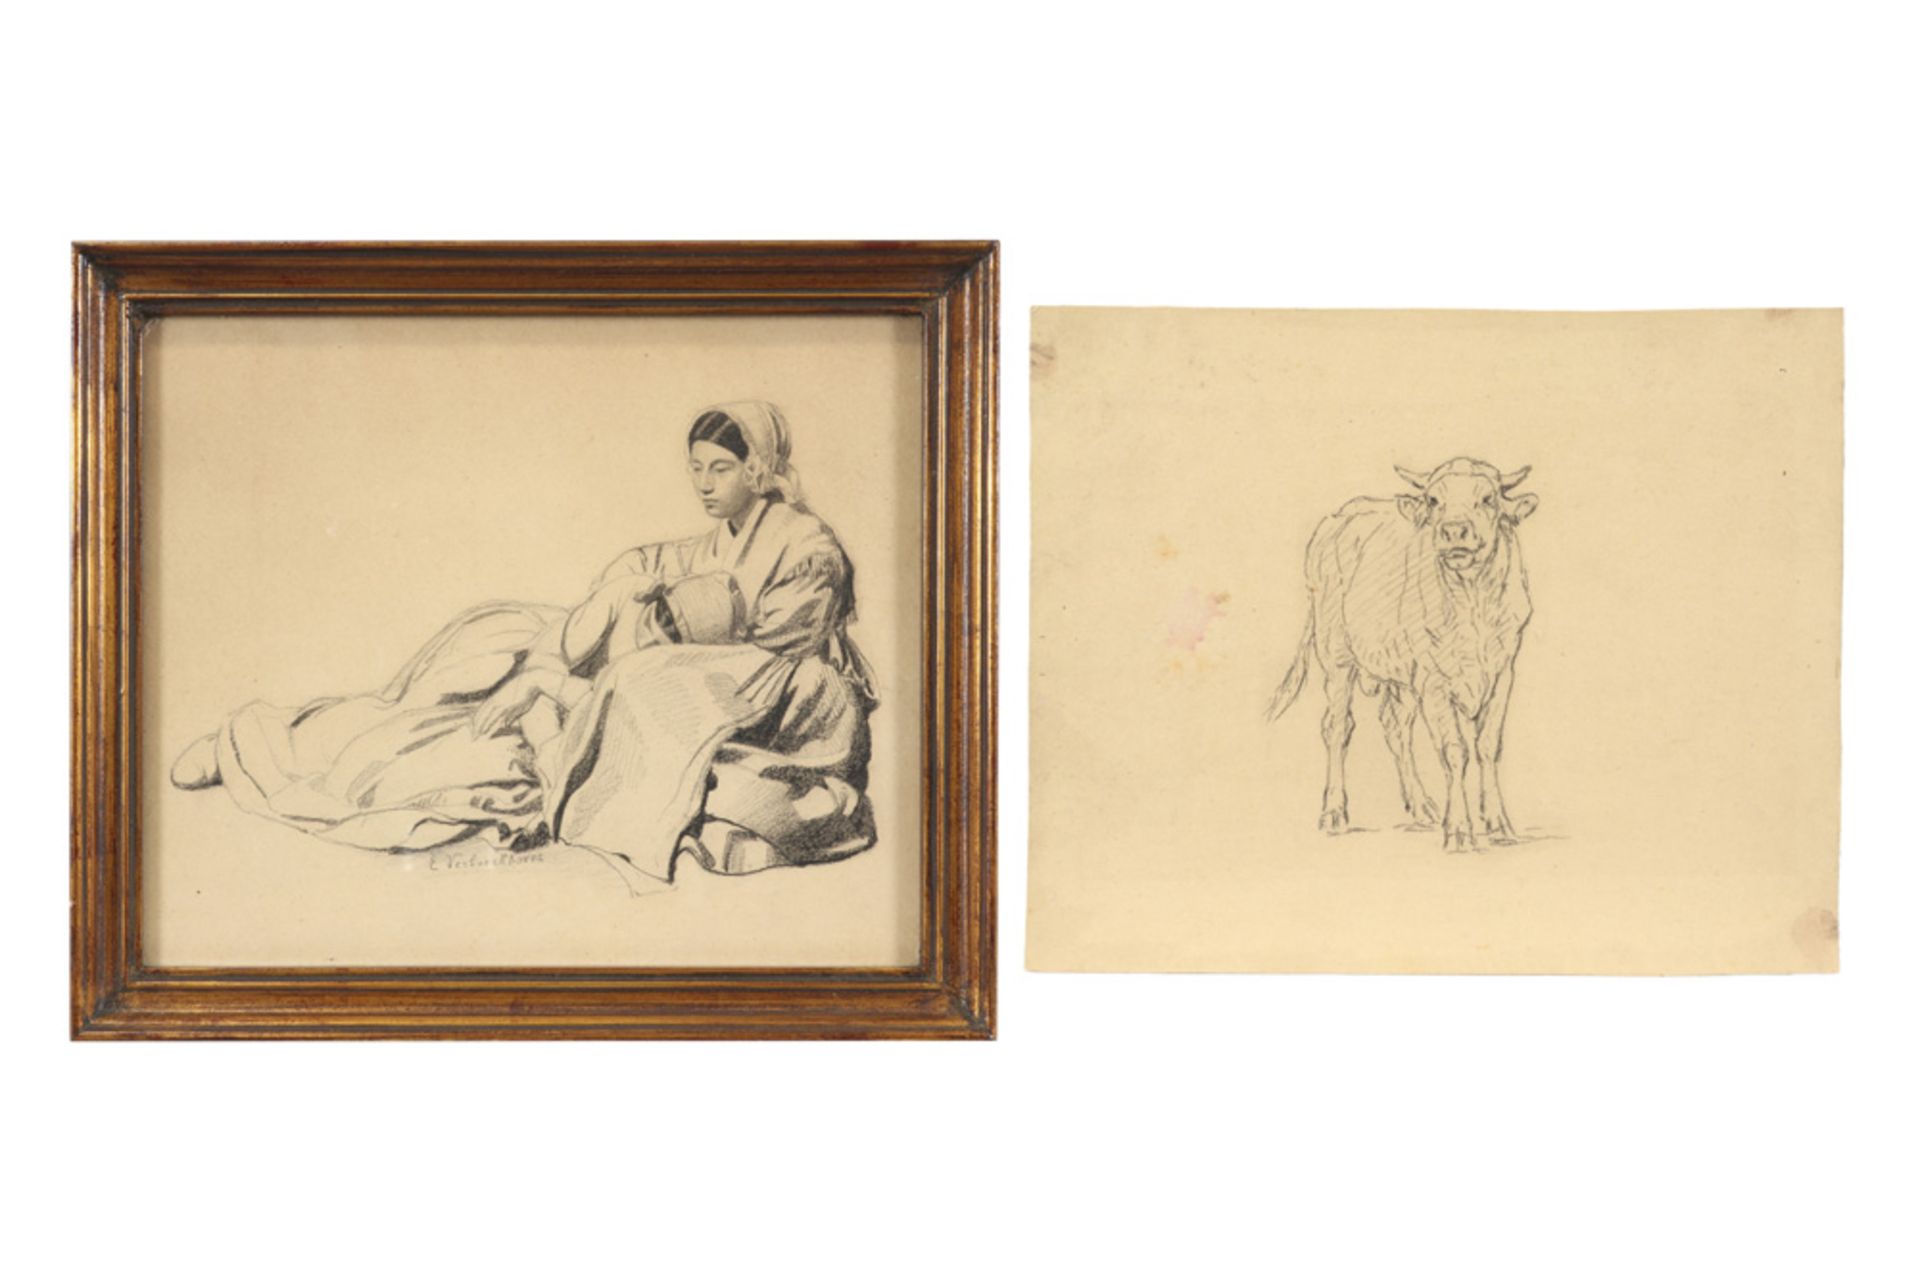 two 19th Cent. pencil drawings - one signed Eugene Verboeckhove ||VERBOECKHOVE EUGENE (1798/99 -